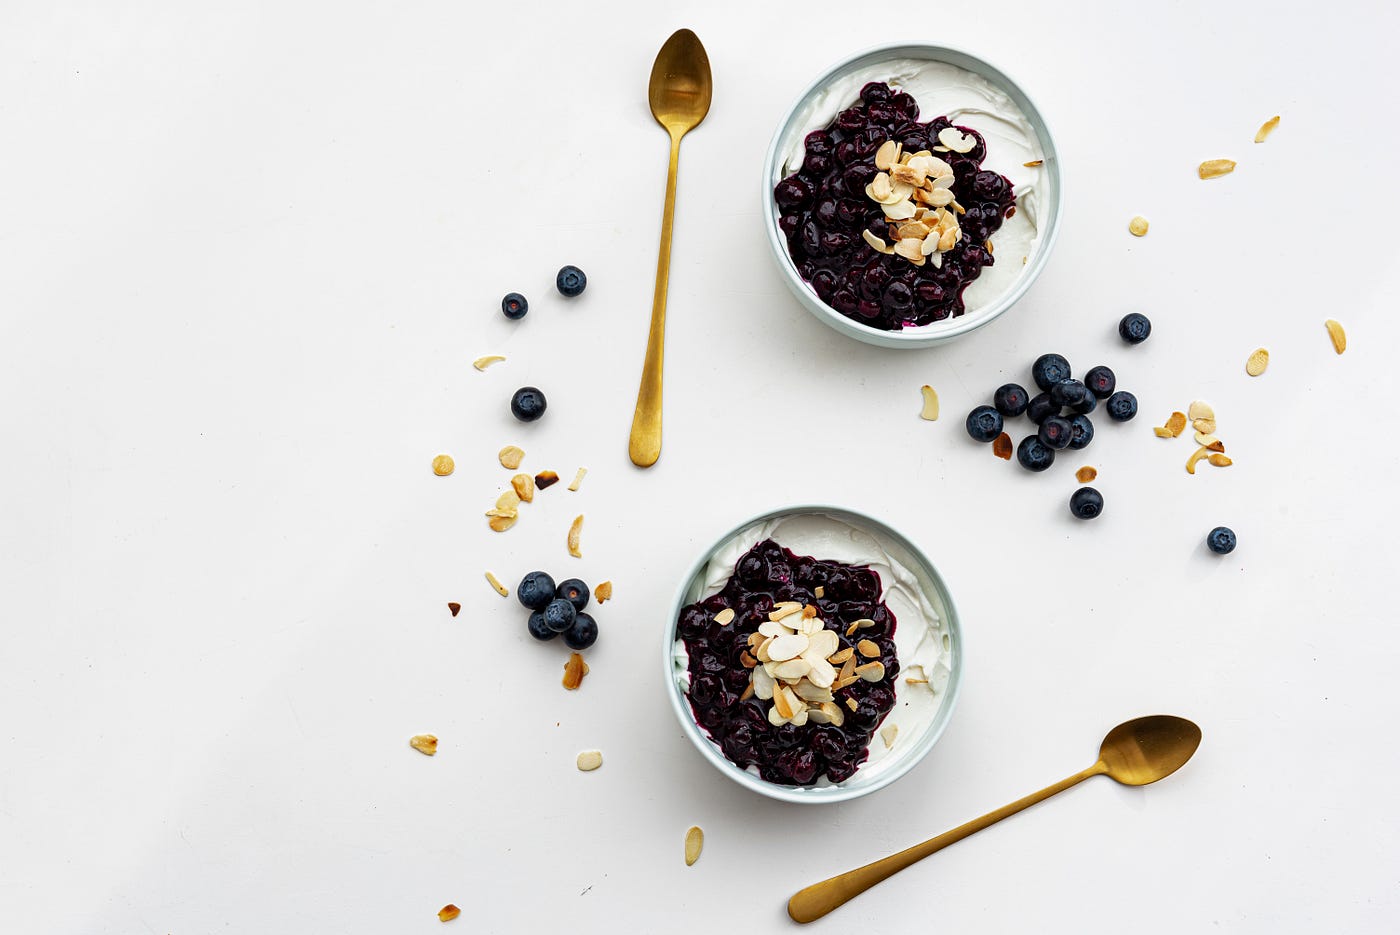 Two bowls of yogurt, topped by blueberries. There are berries and some cereal flakes scattered around the bowls. Two long gold-colored spoons sit on a white background.